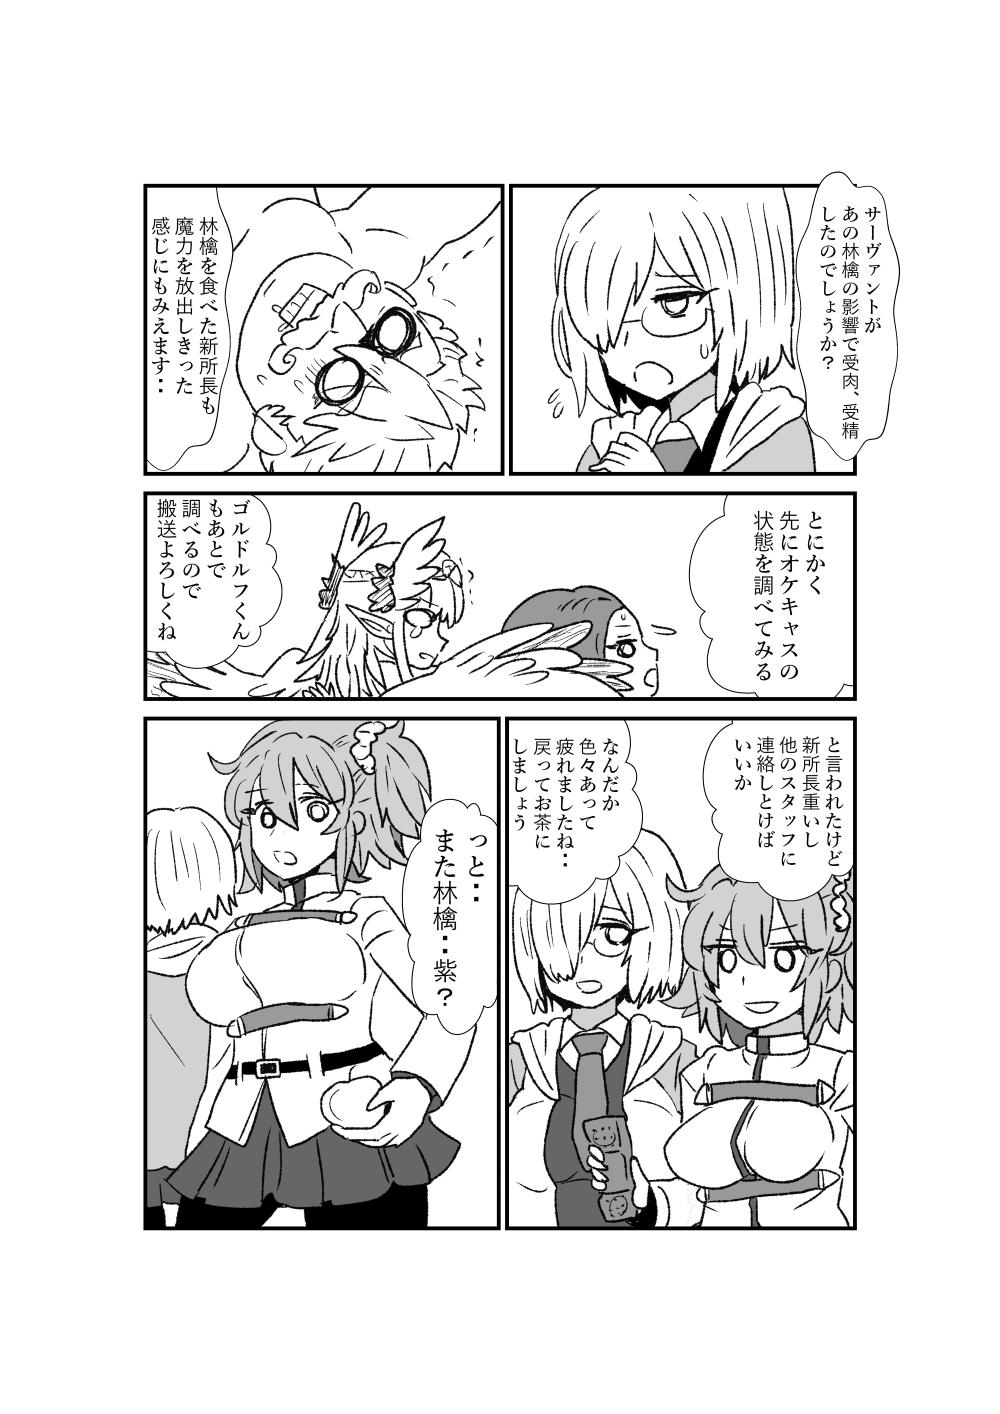 Bucetuda FPO~桃色林檎の種付け周回～ - Fate grand order Japan - Page 9